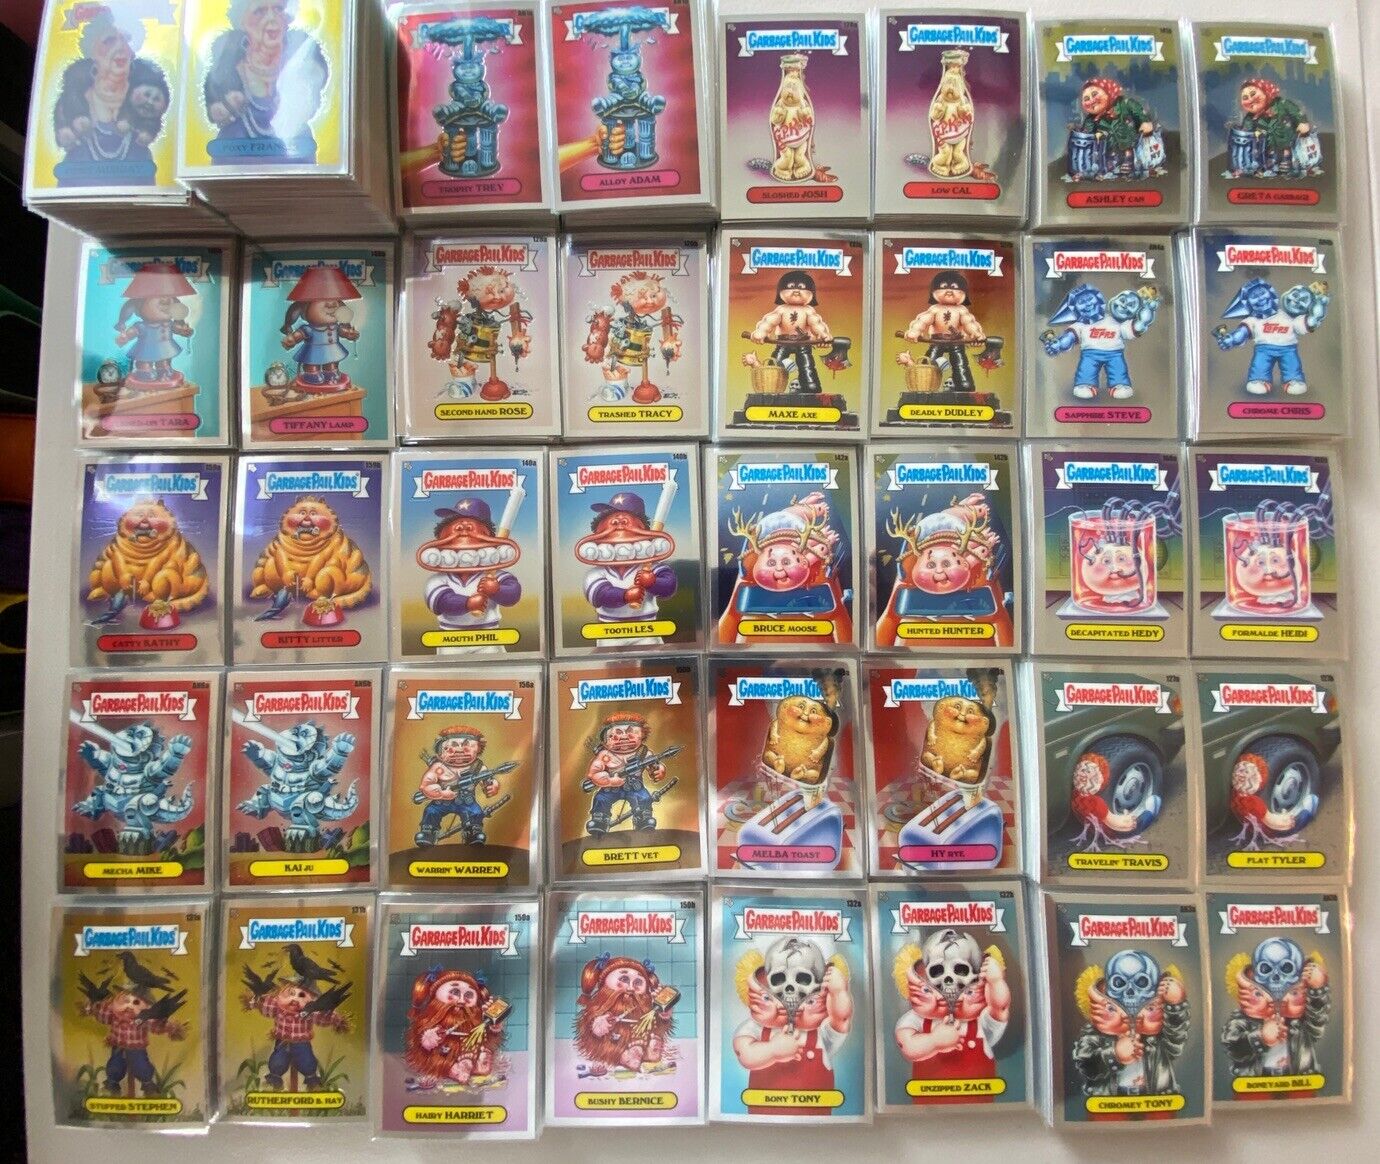 2021 Topps Garbage Pail Kids Chrome Cards Lot of ✨1,500 X✨